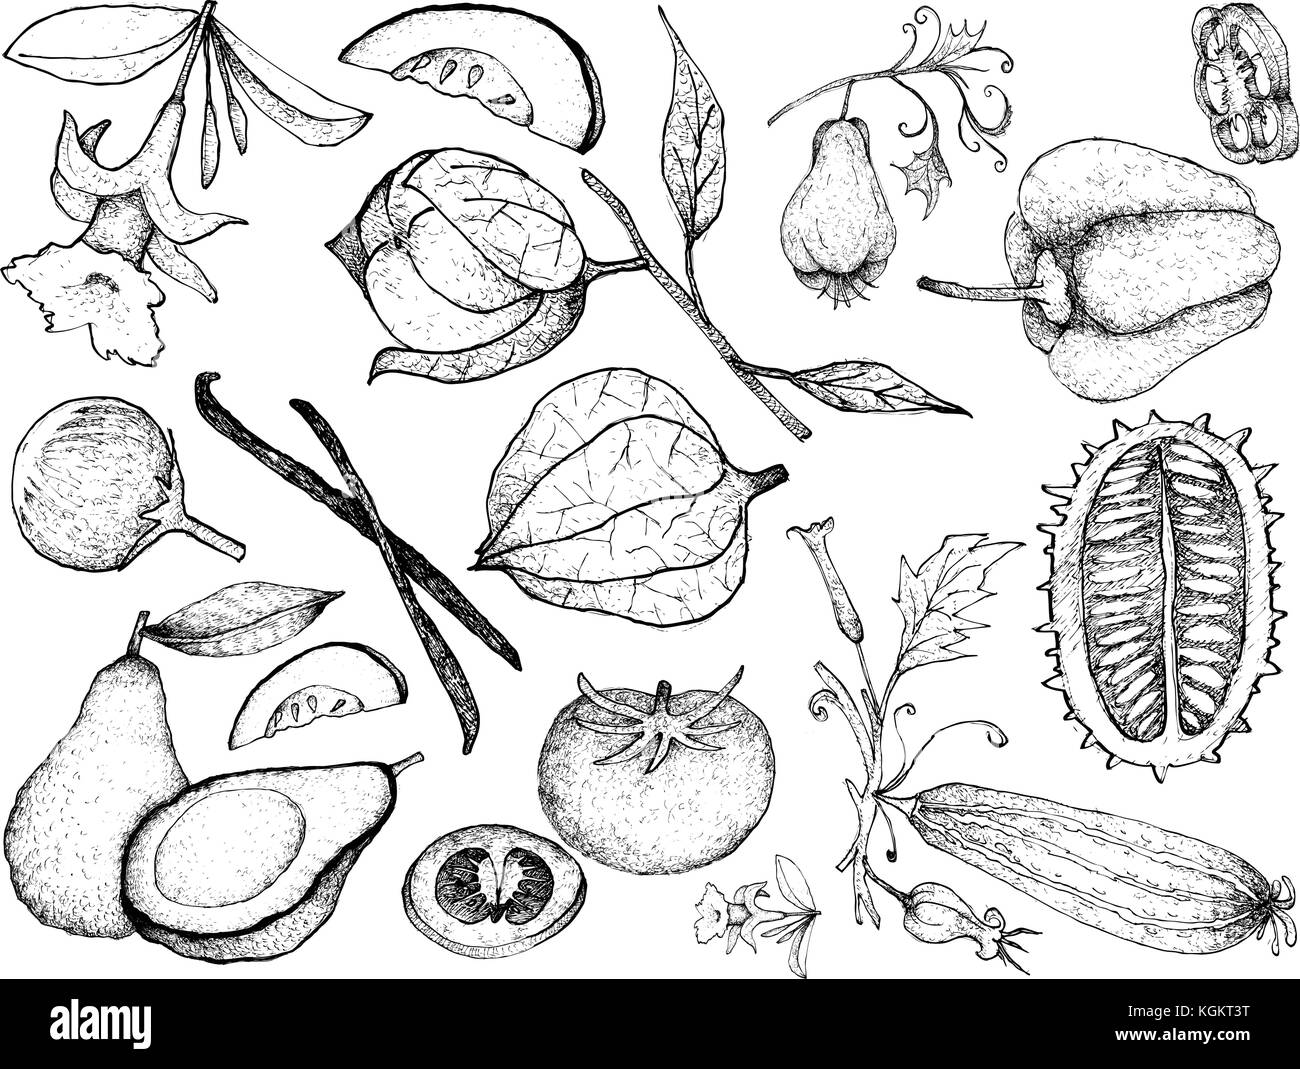 Vegetable and Herb, Illustration of Hand Drawn Sketch Delicious Fresh Gourd and Squash Isolated on White Background. Stock Vector